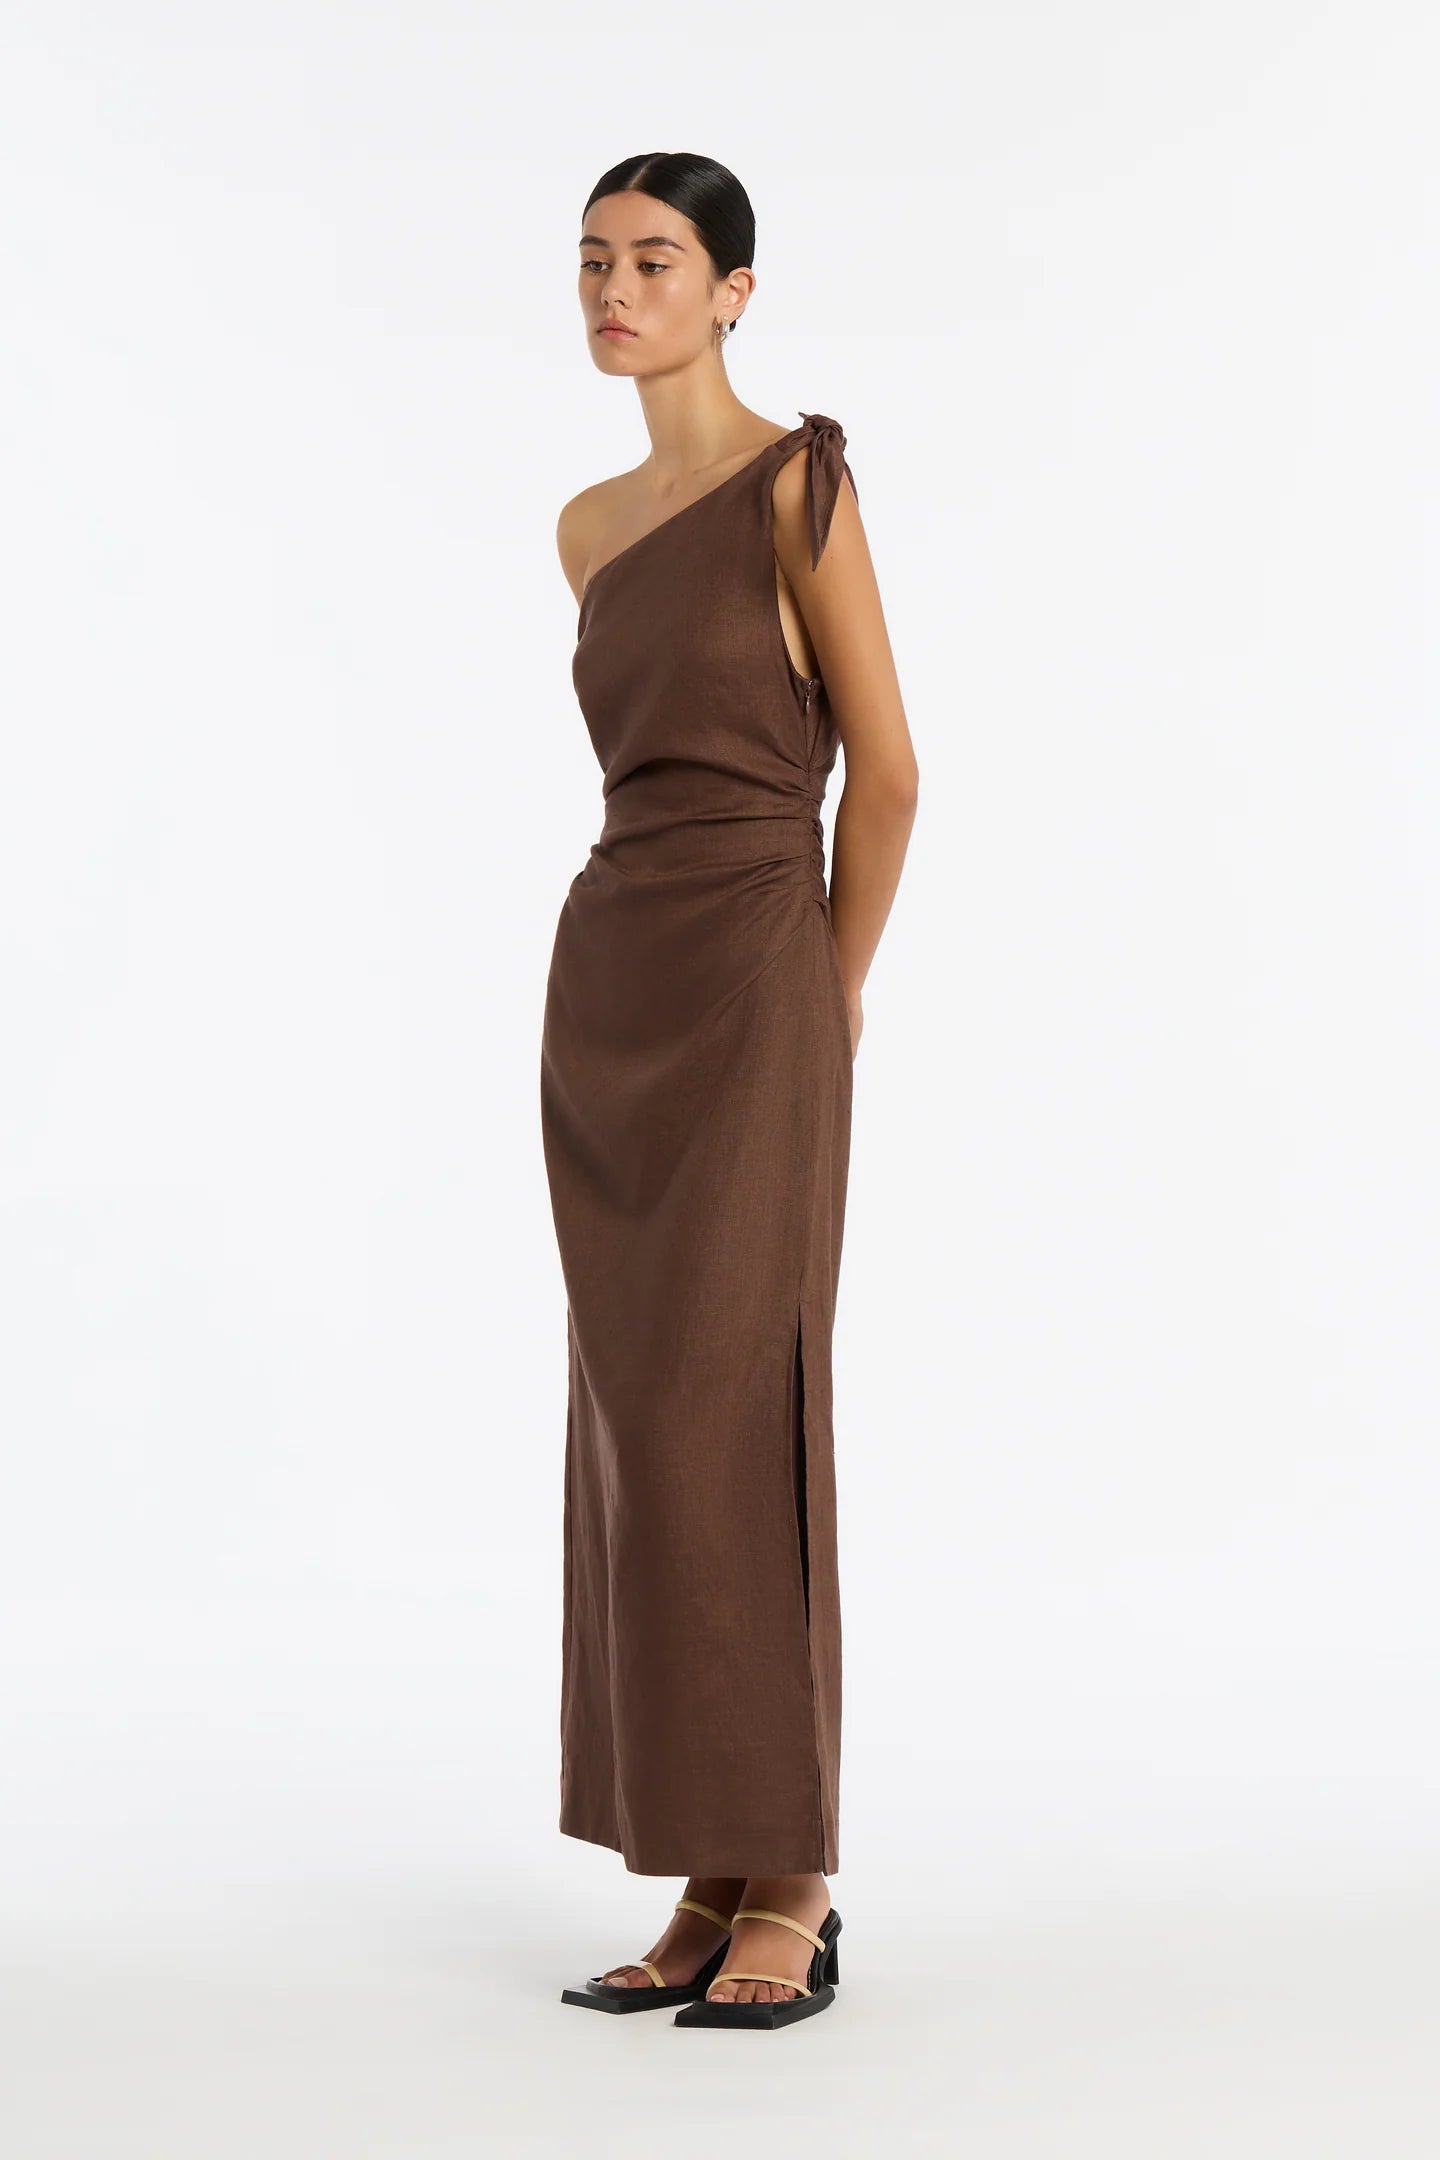 SIR the Label Bettina off Shoulder Dress in Chocolate